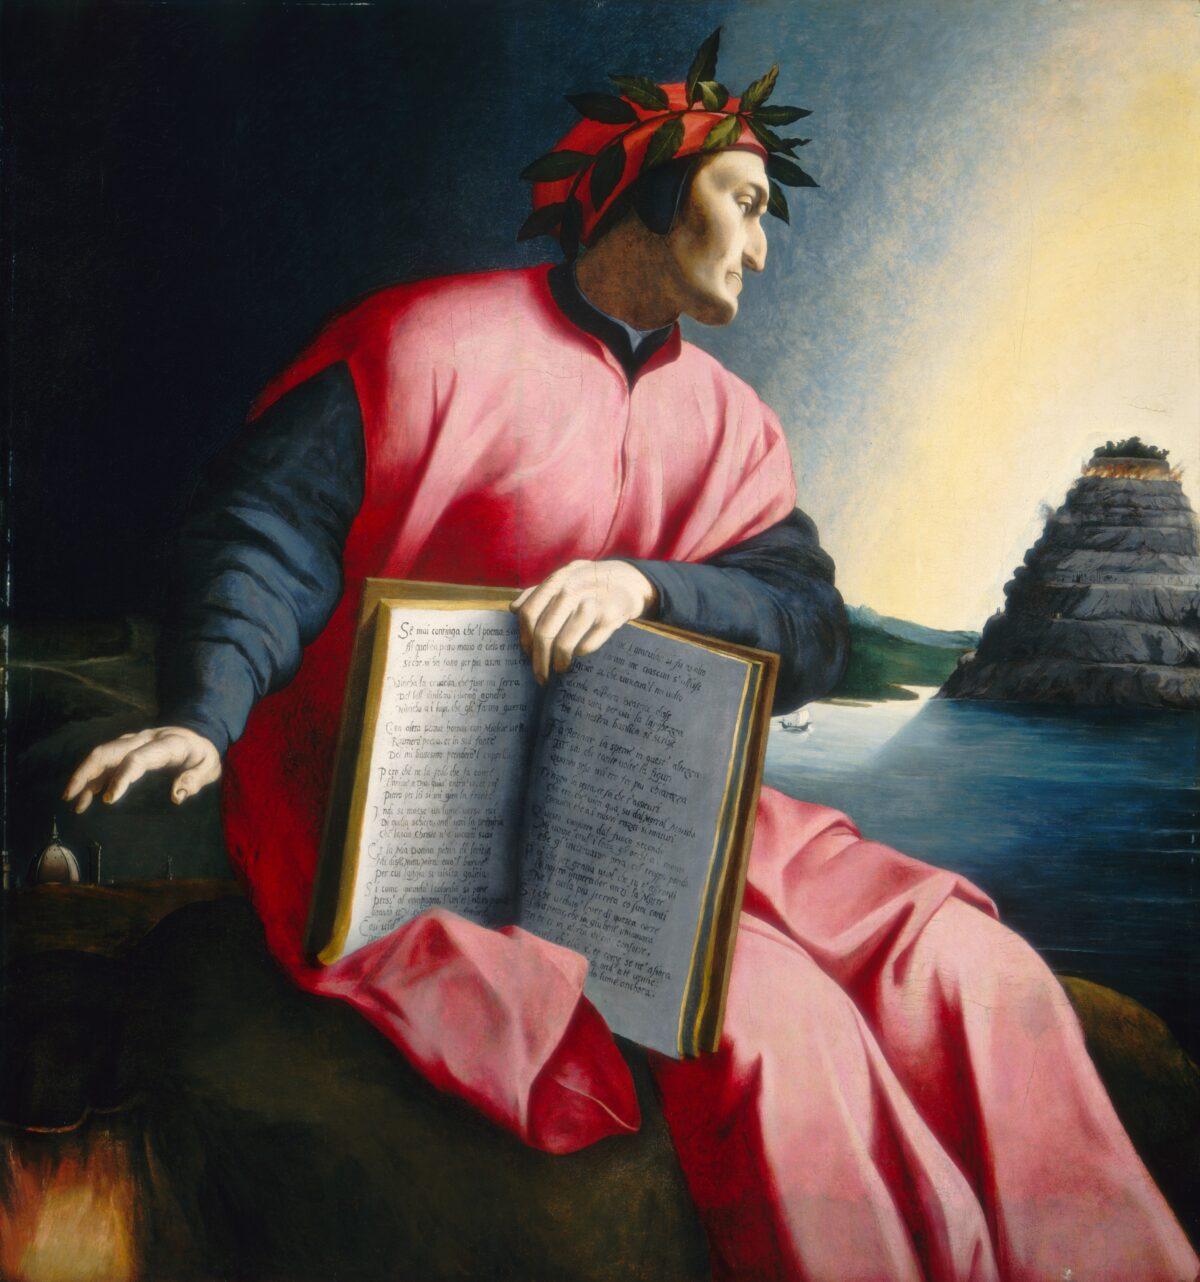 Allegorical portrait of Dante Alighieri, late 16th century, by an unknown master. National Gallery of Art. (Public Domain)